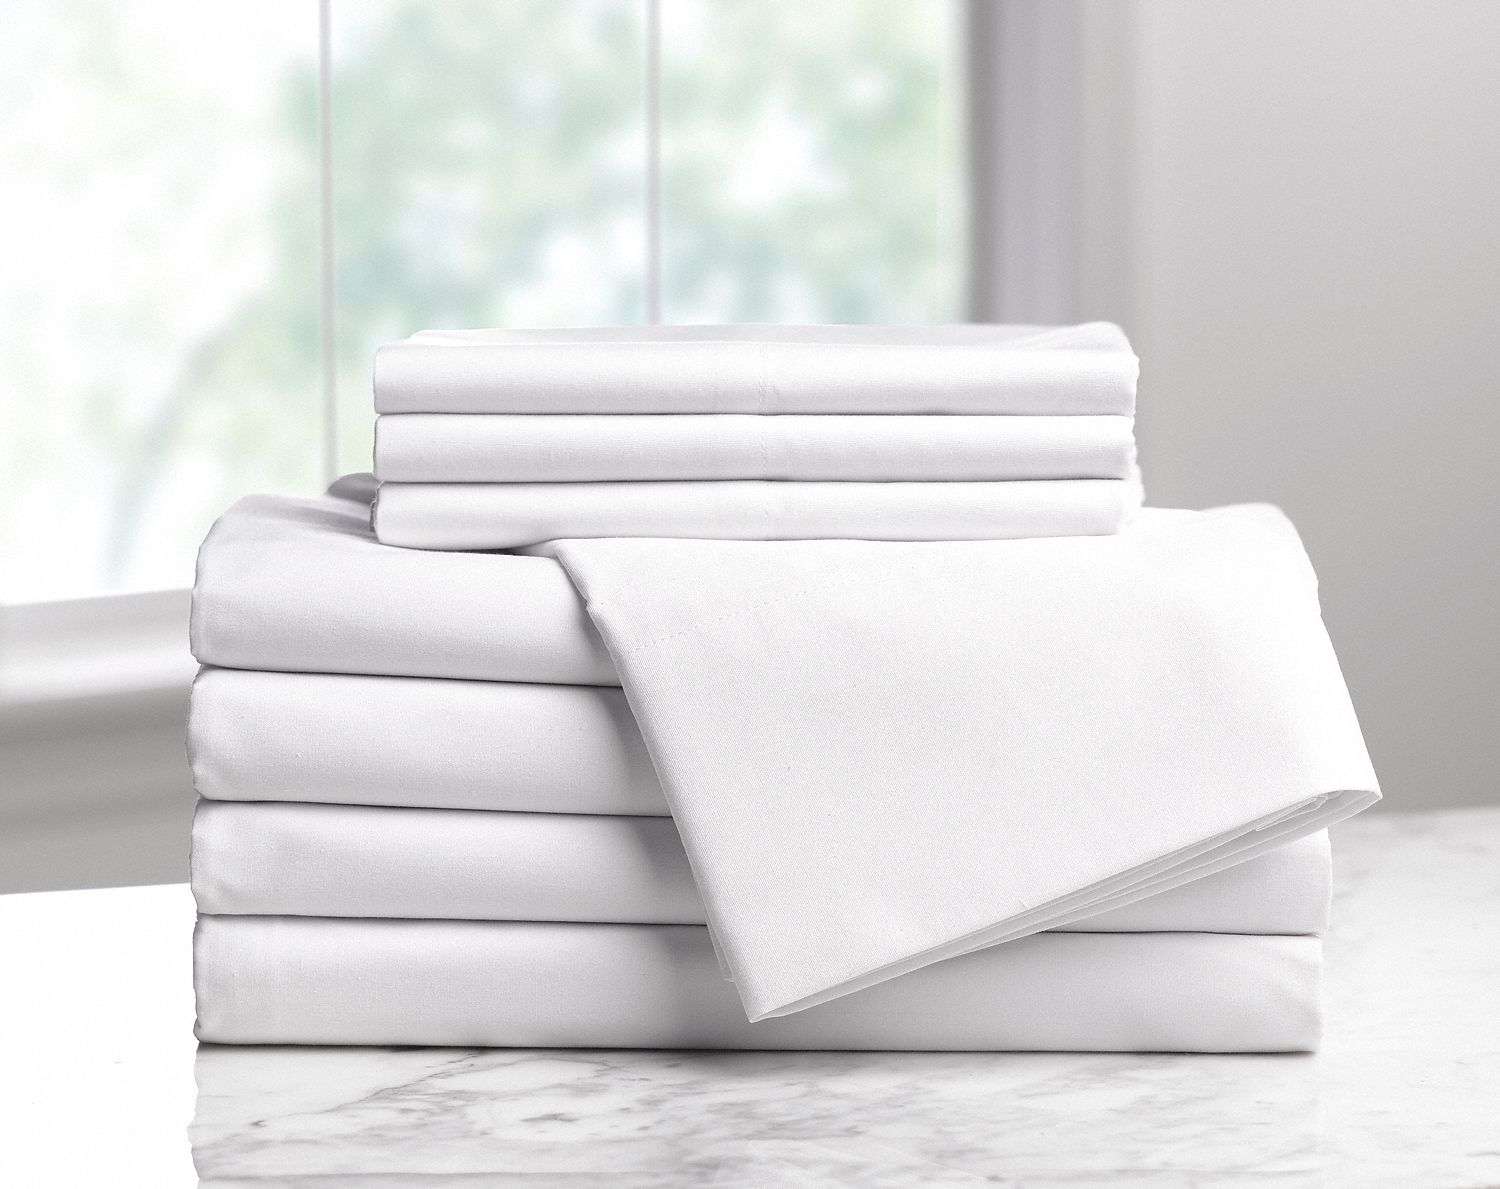 Pillowcase: King, 44 in Wd, 45 in Lg, 60% Cotton/40% Polyester Fabric, T200, White, 12 PK